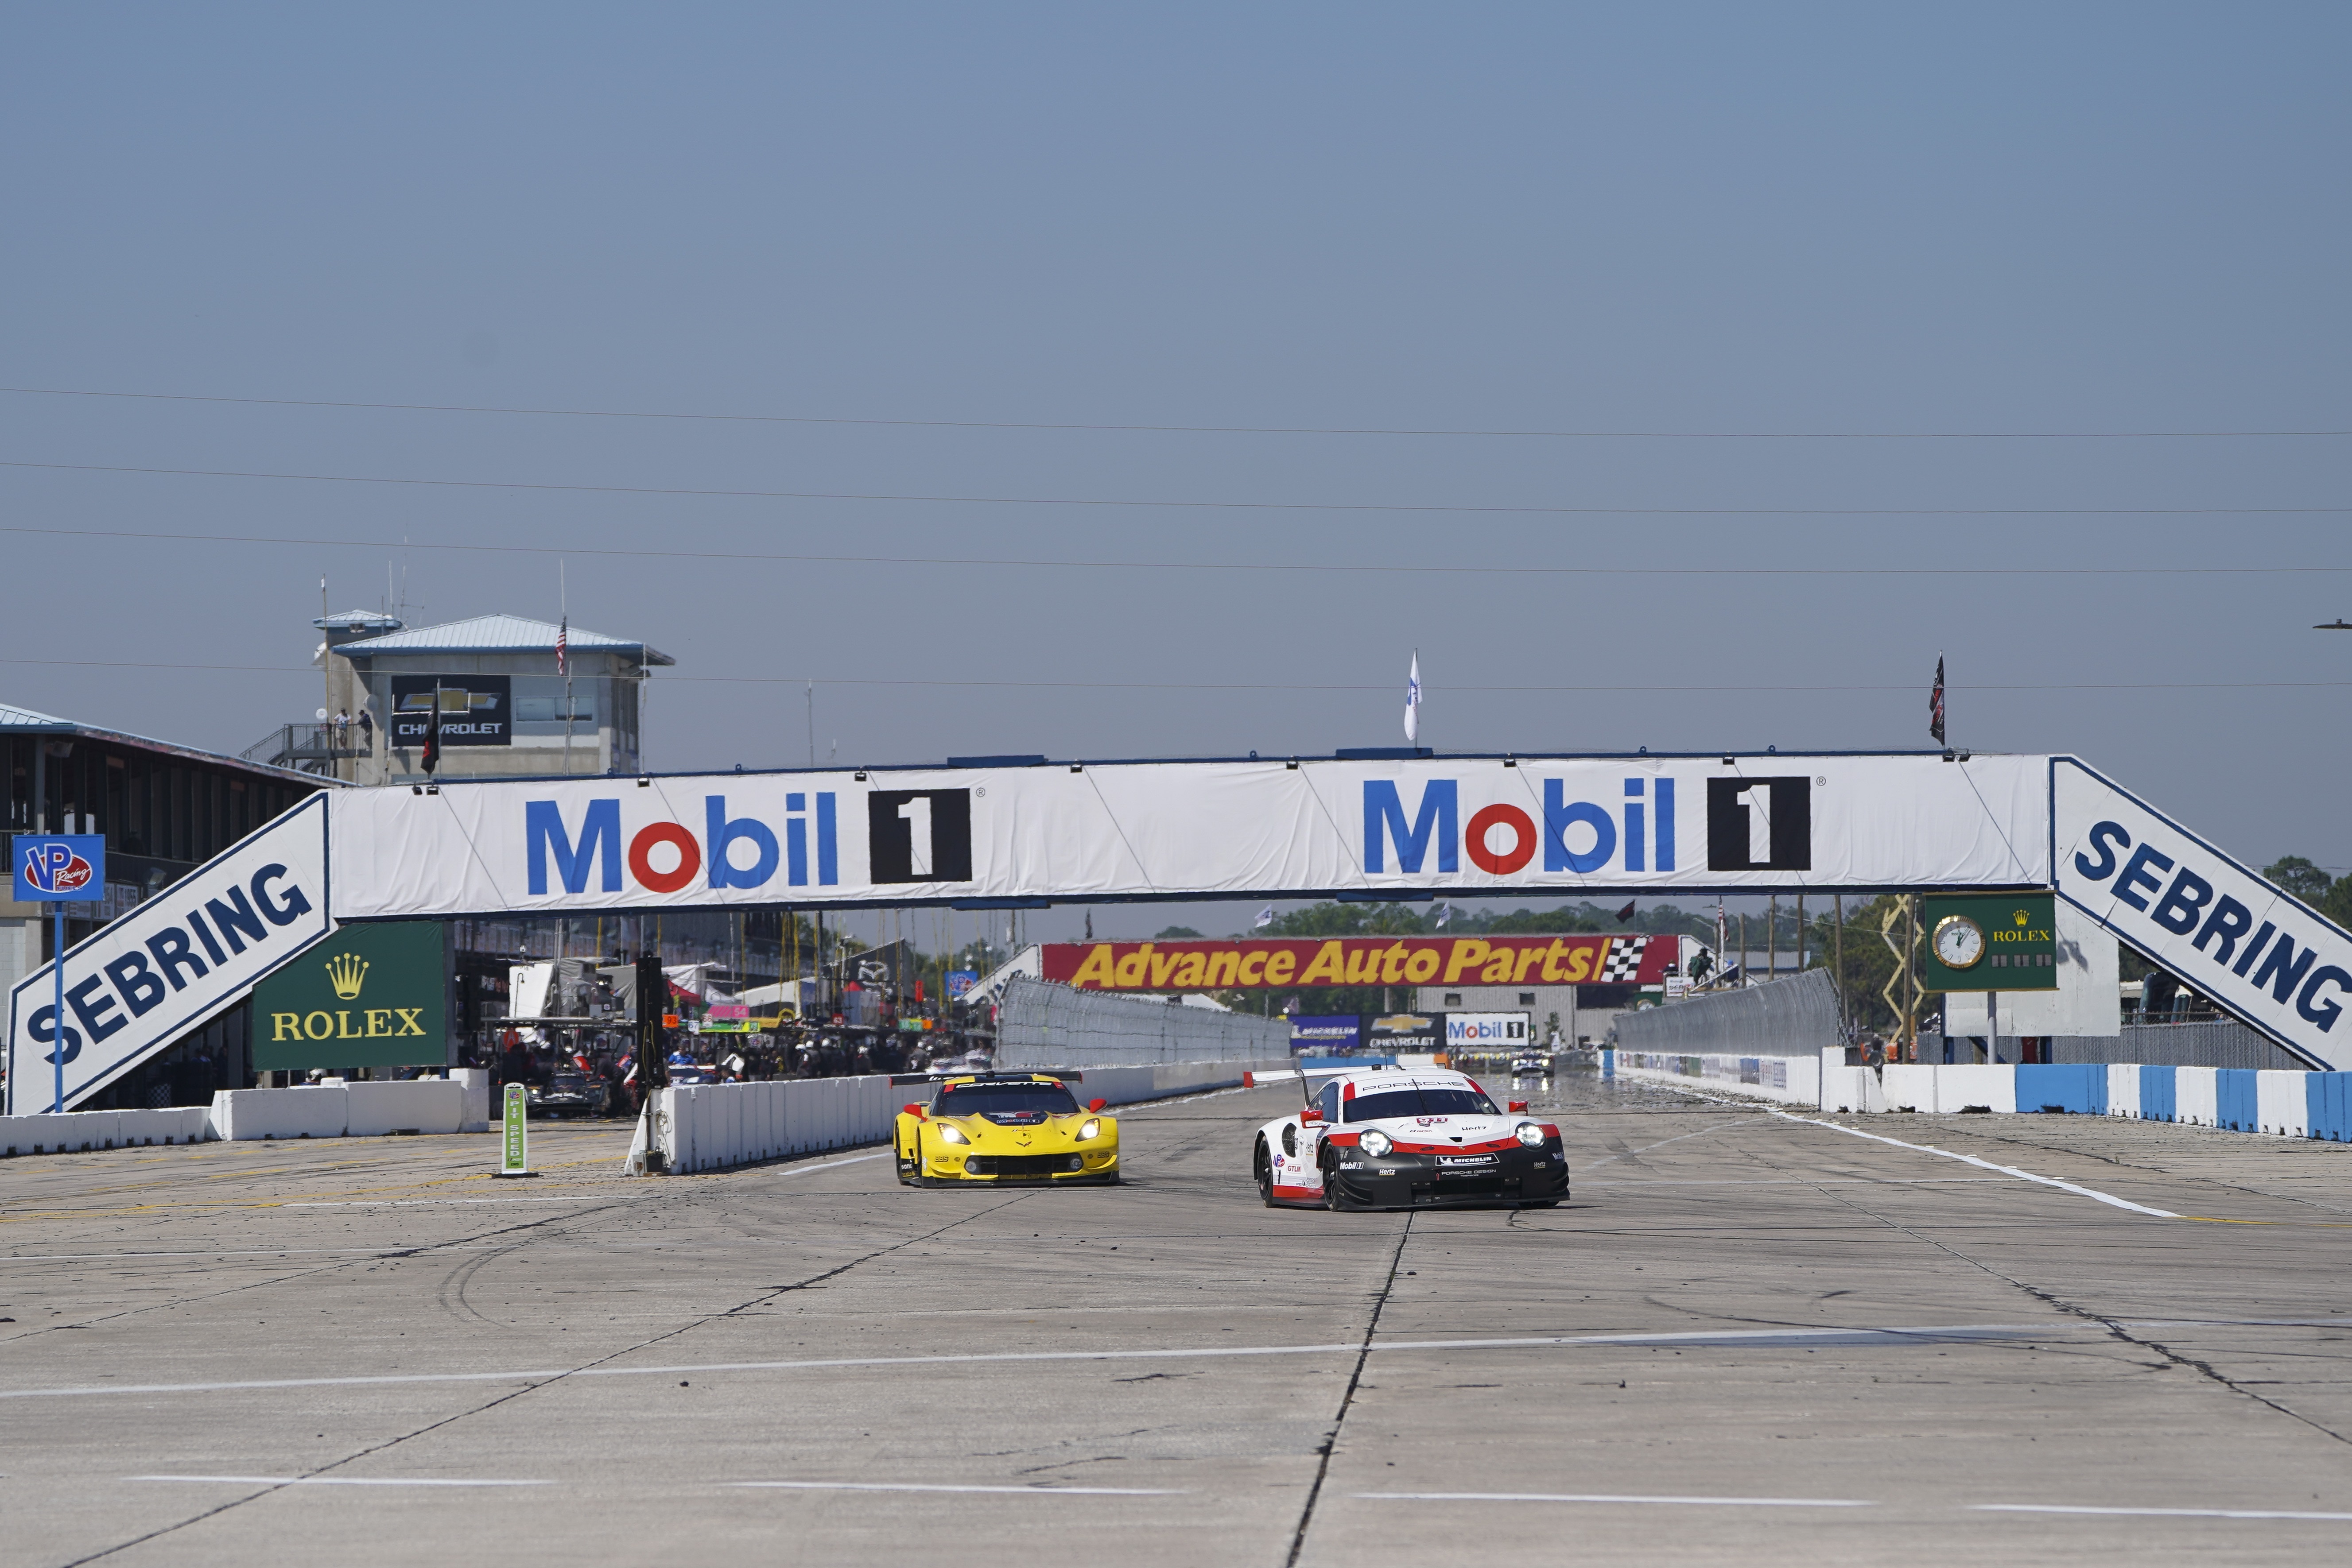 Mobil 1™ and Sebring Extend High-Speed Race Partnership | Business Wire